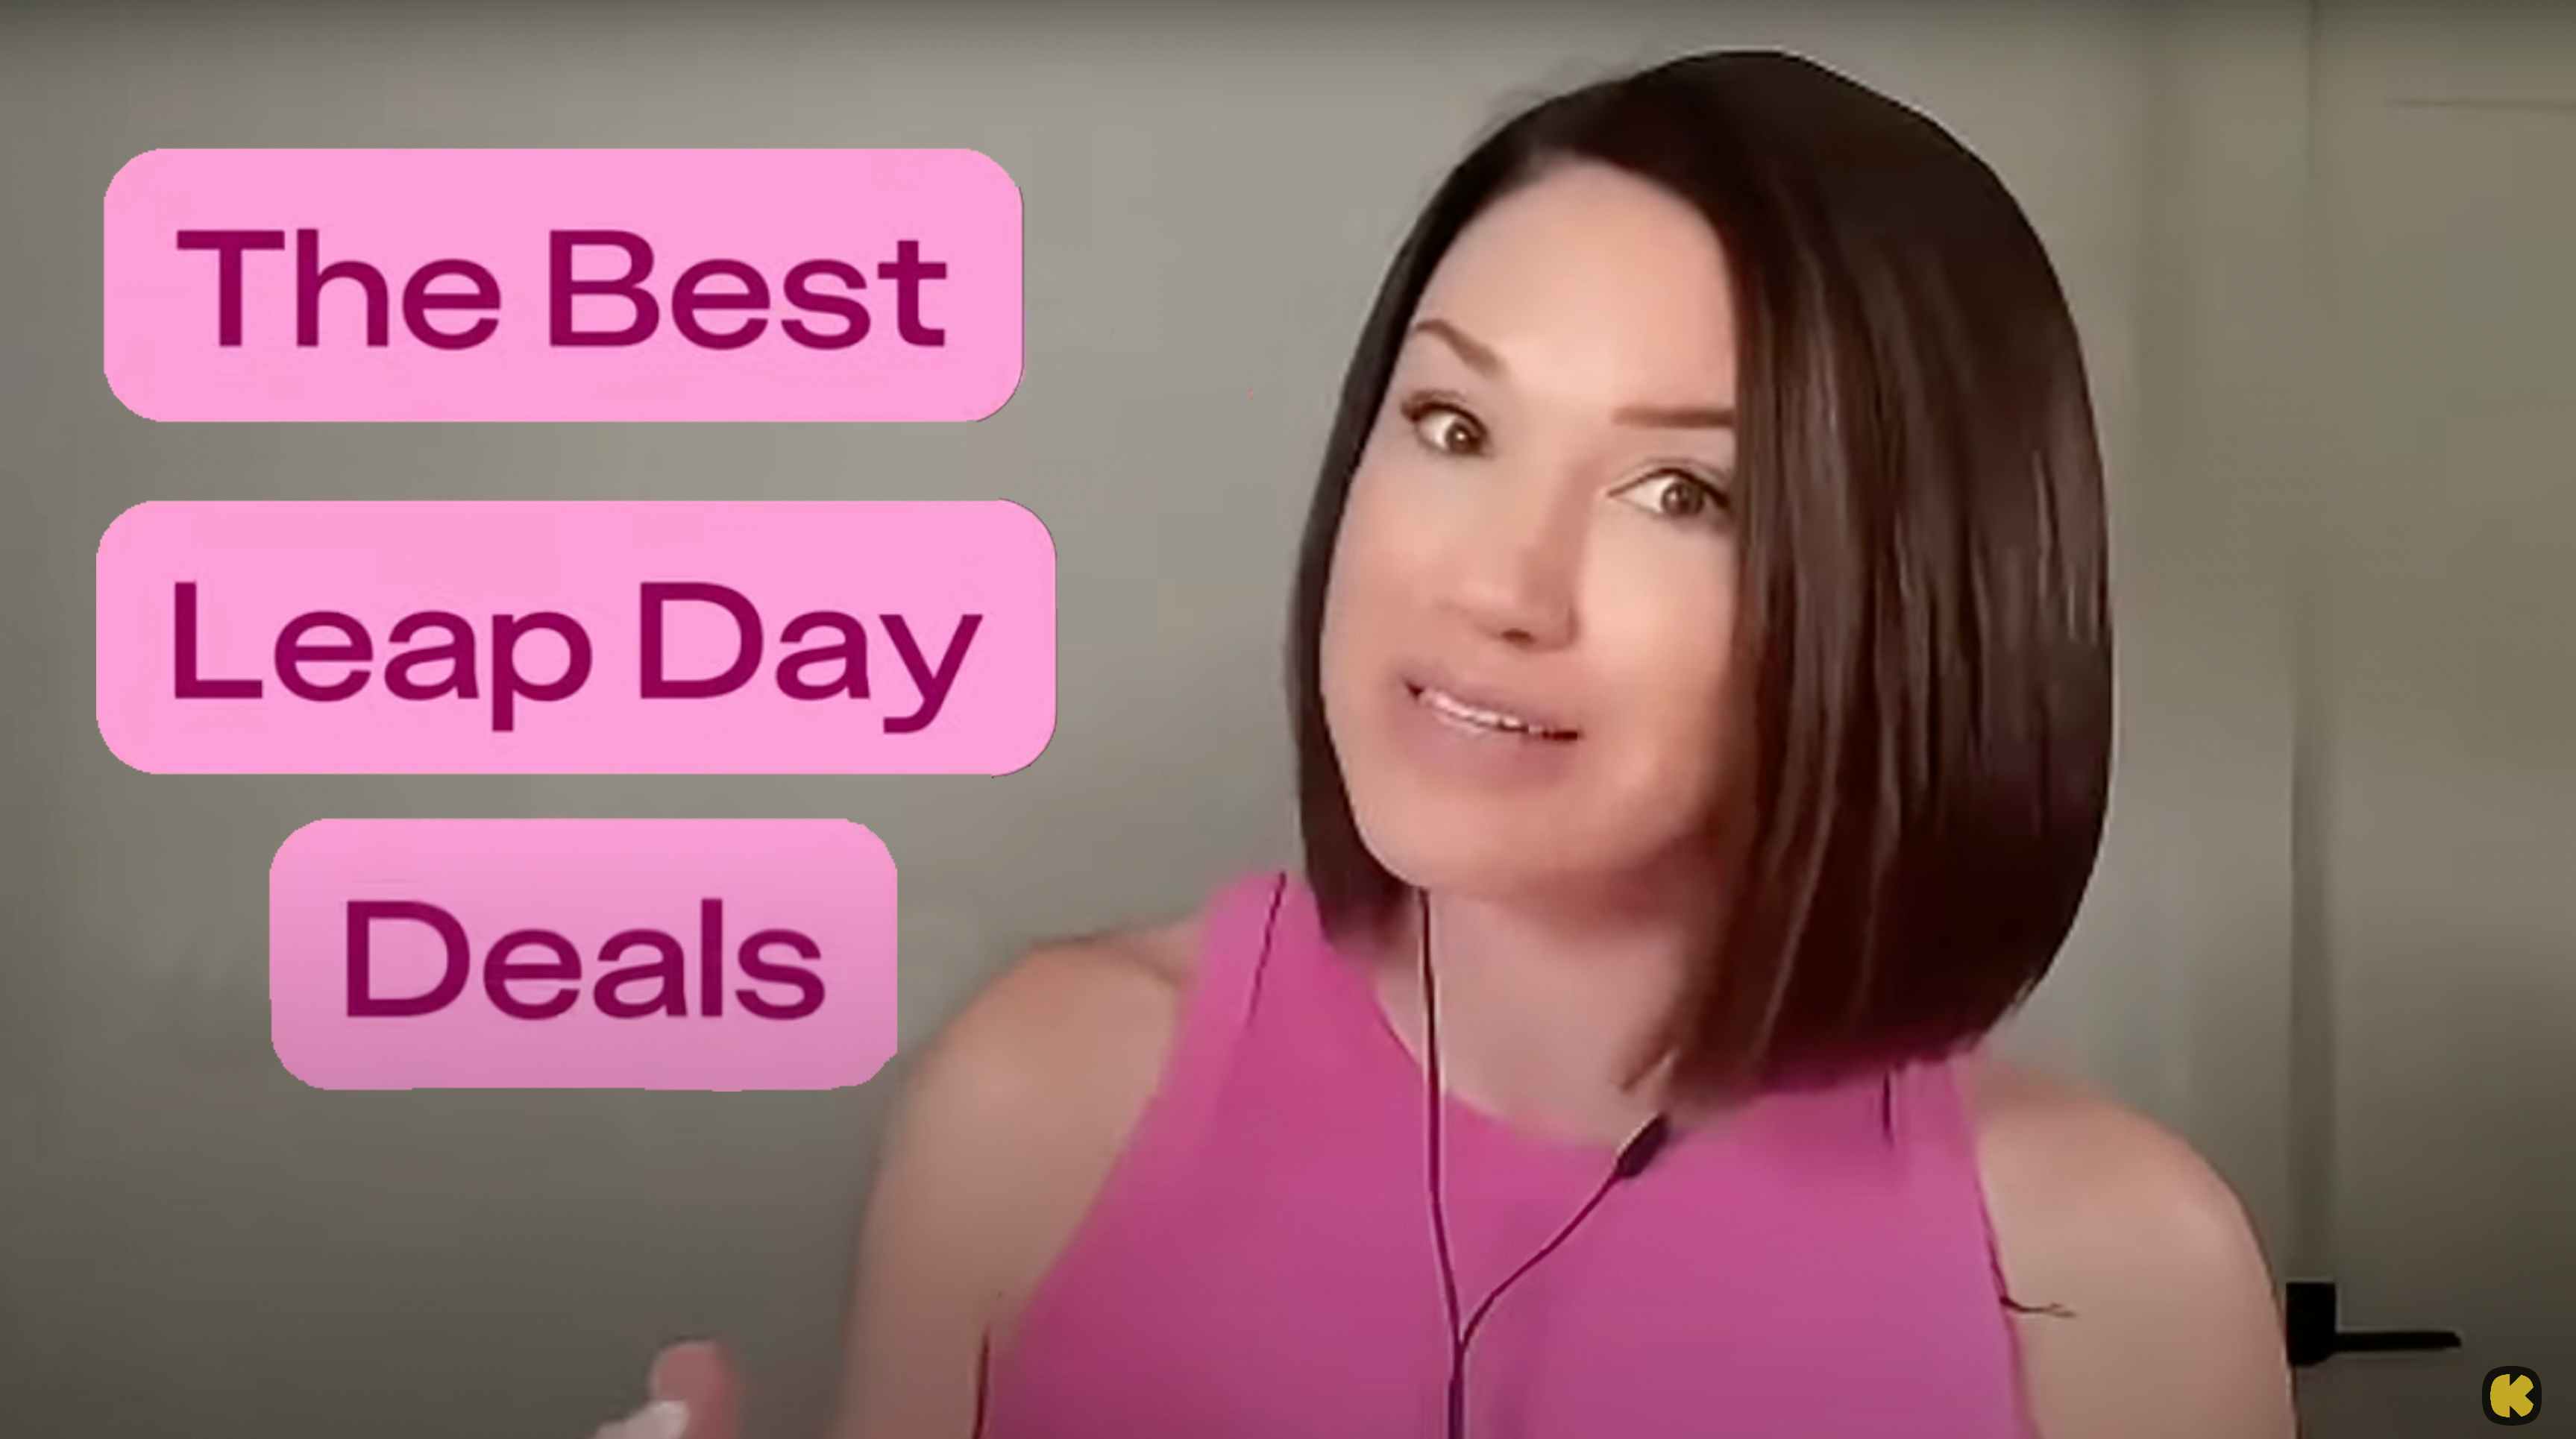 Video Thumbnail Image of Krazy Coupon Lady Cofounder, Joanie Demer, Talking About the Best Leap Day Deals